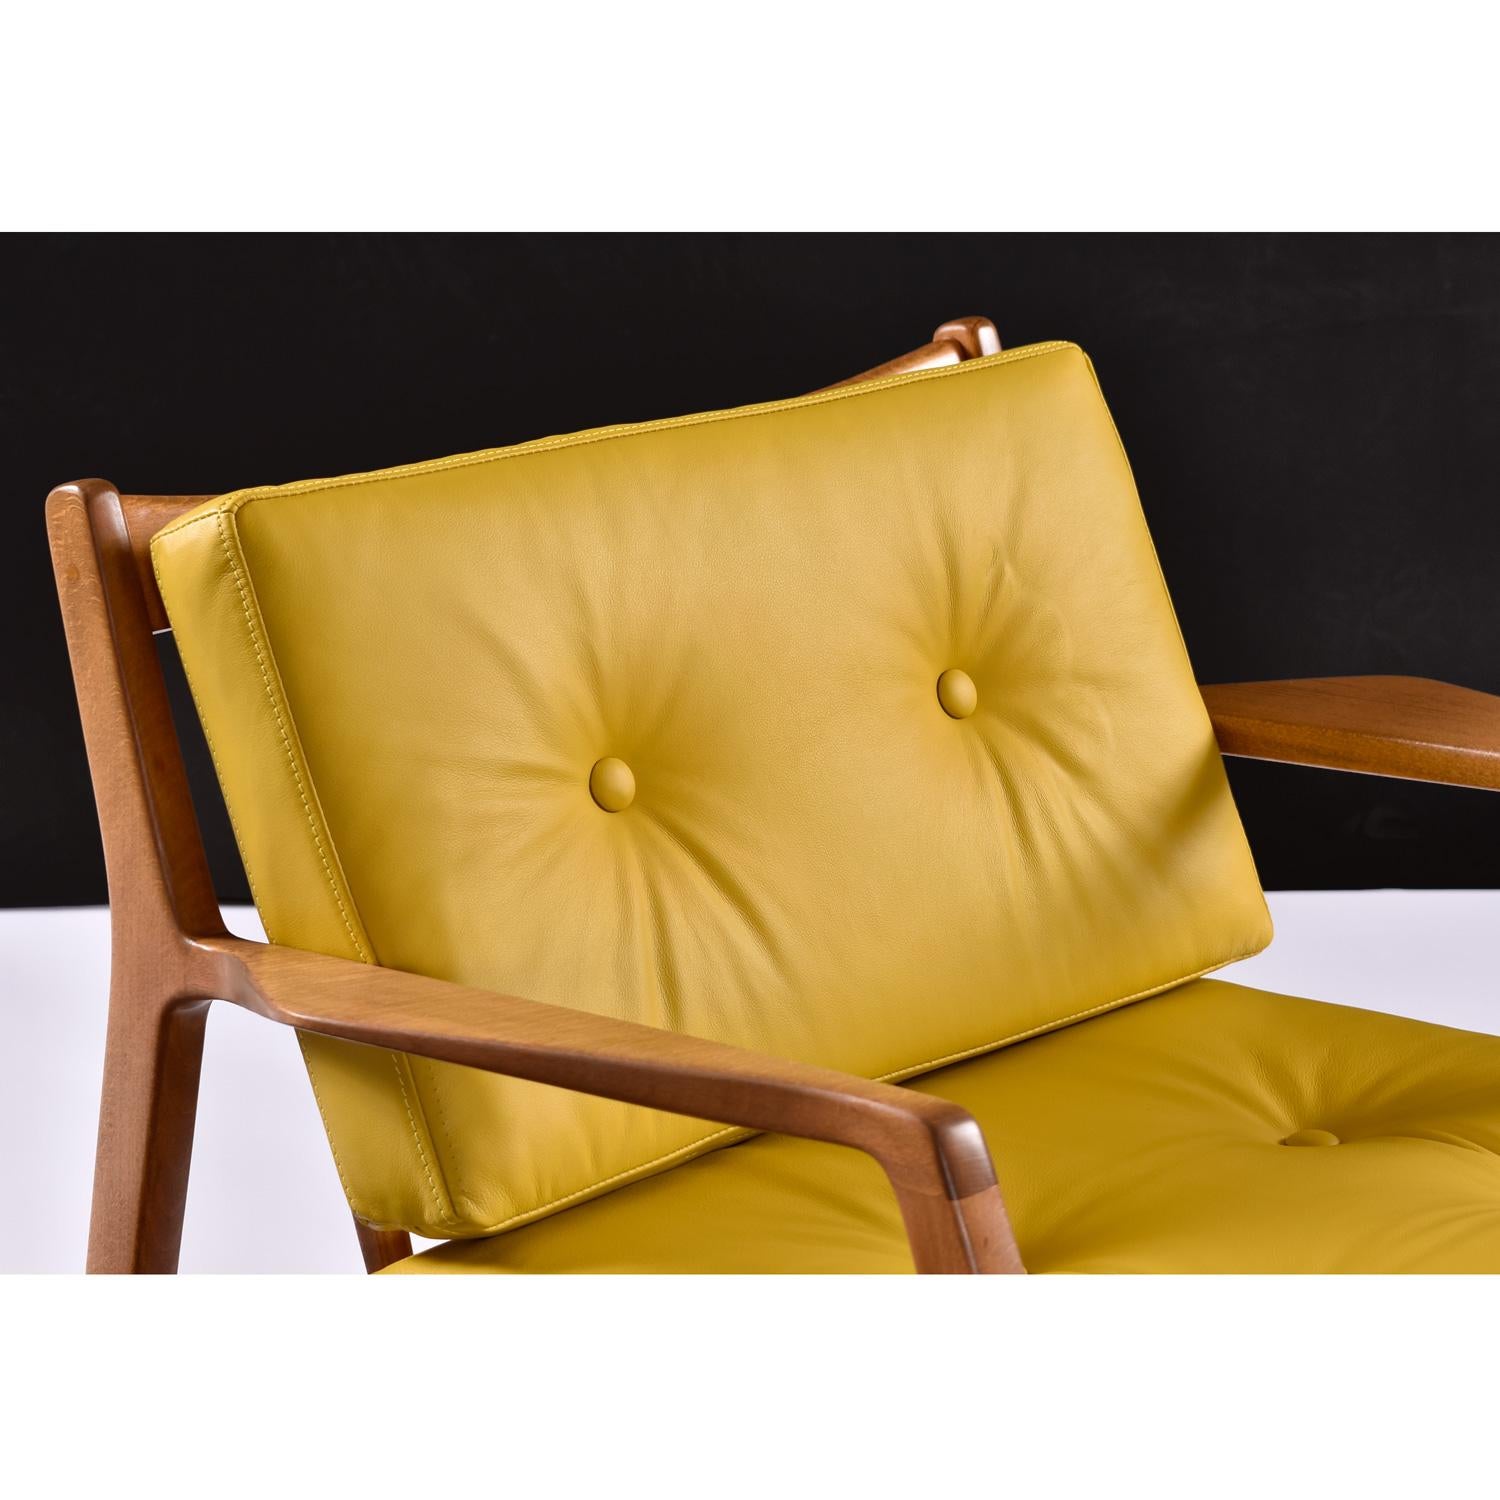 Mid-20th Century Yellow Leather Lawrence Peabody for Selig Danish Modern Danish Lounge Chairs For Sale